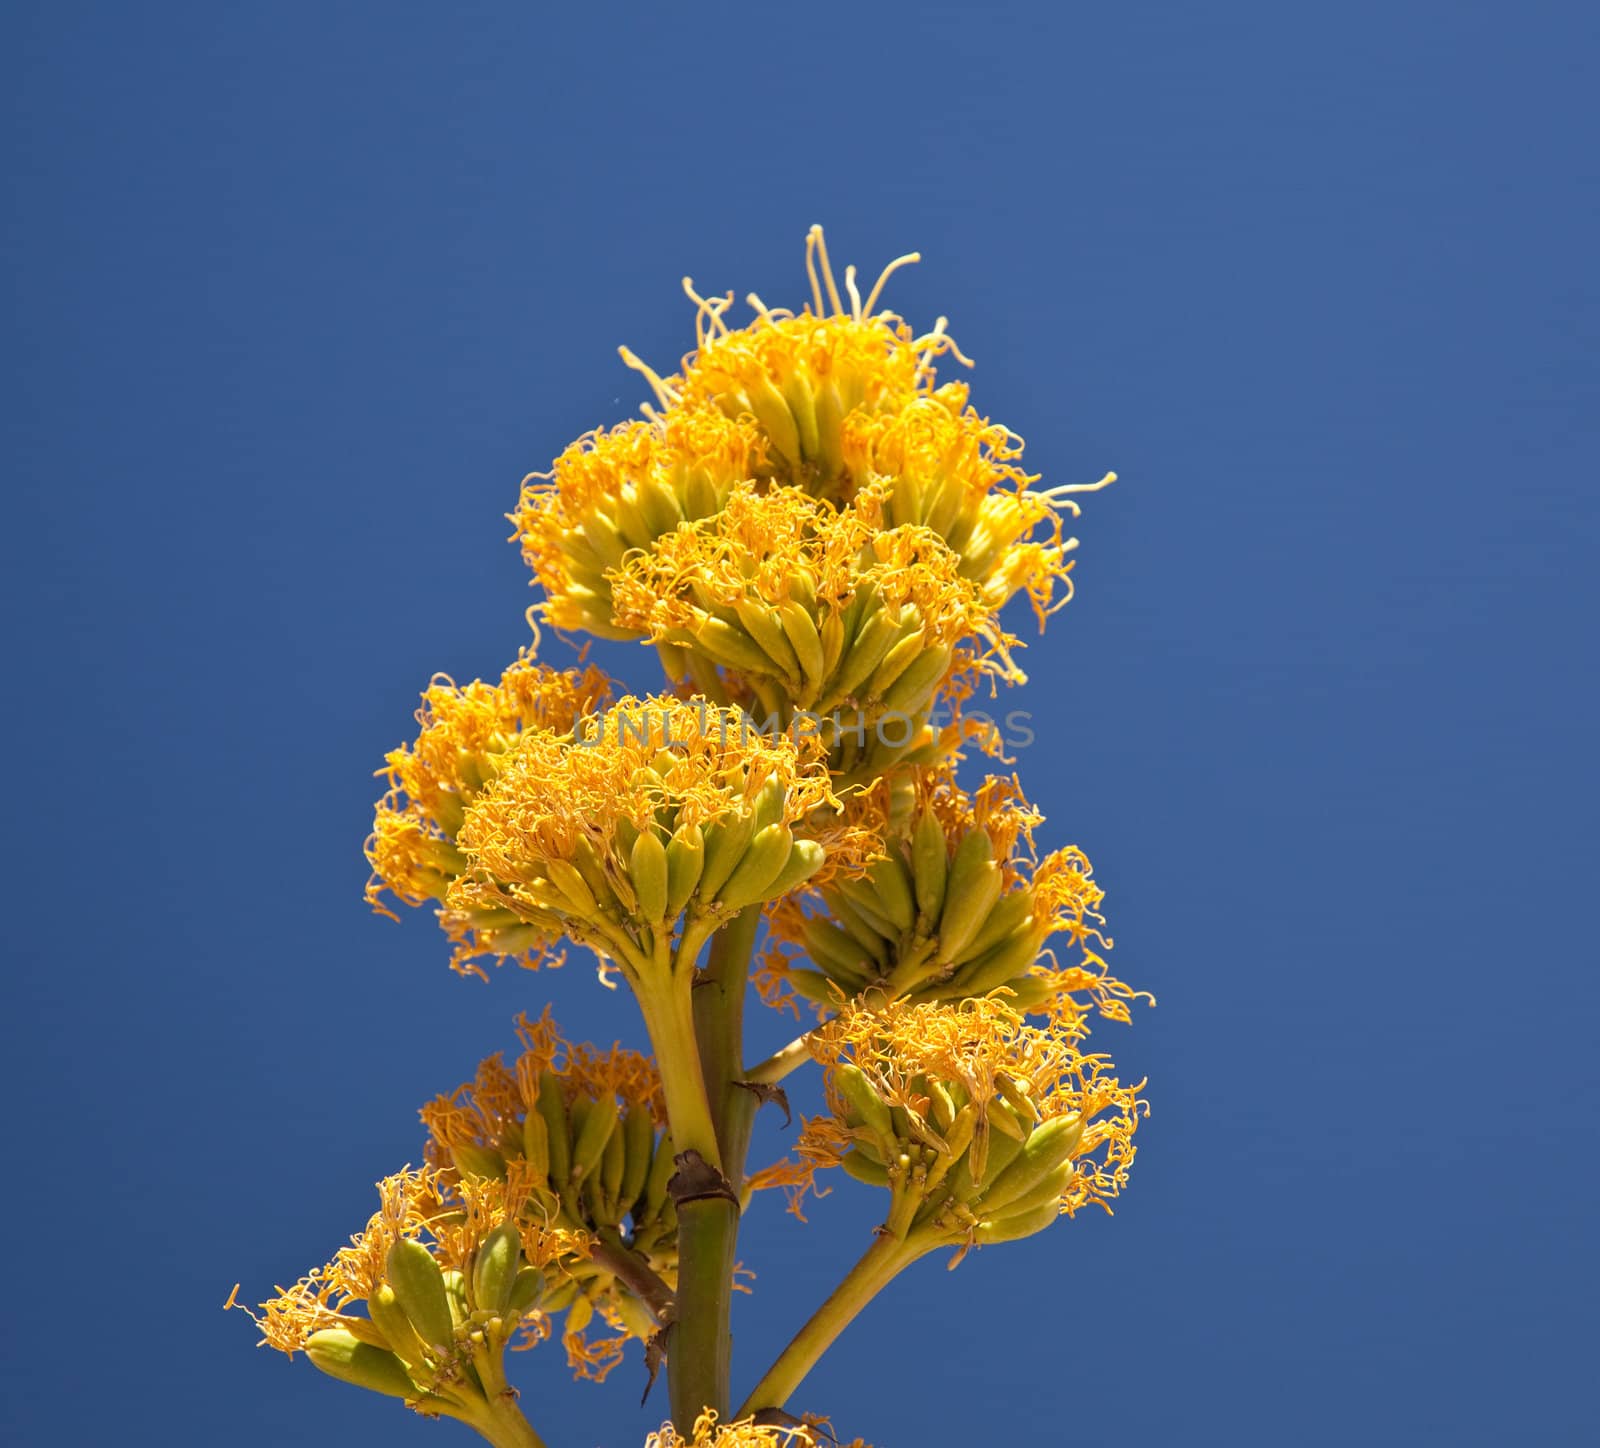 Member of Agave family, Parry's agave bloom once in their life about every 25 years